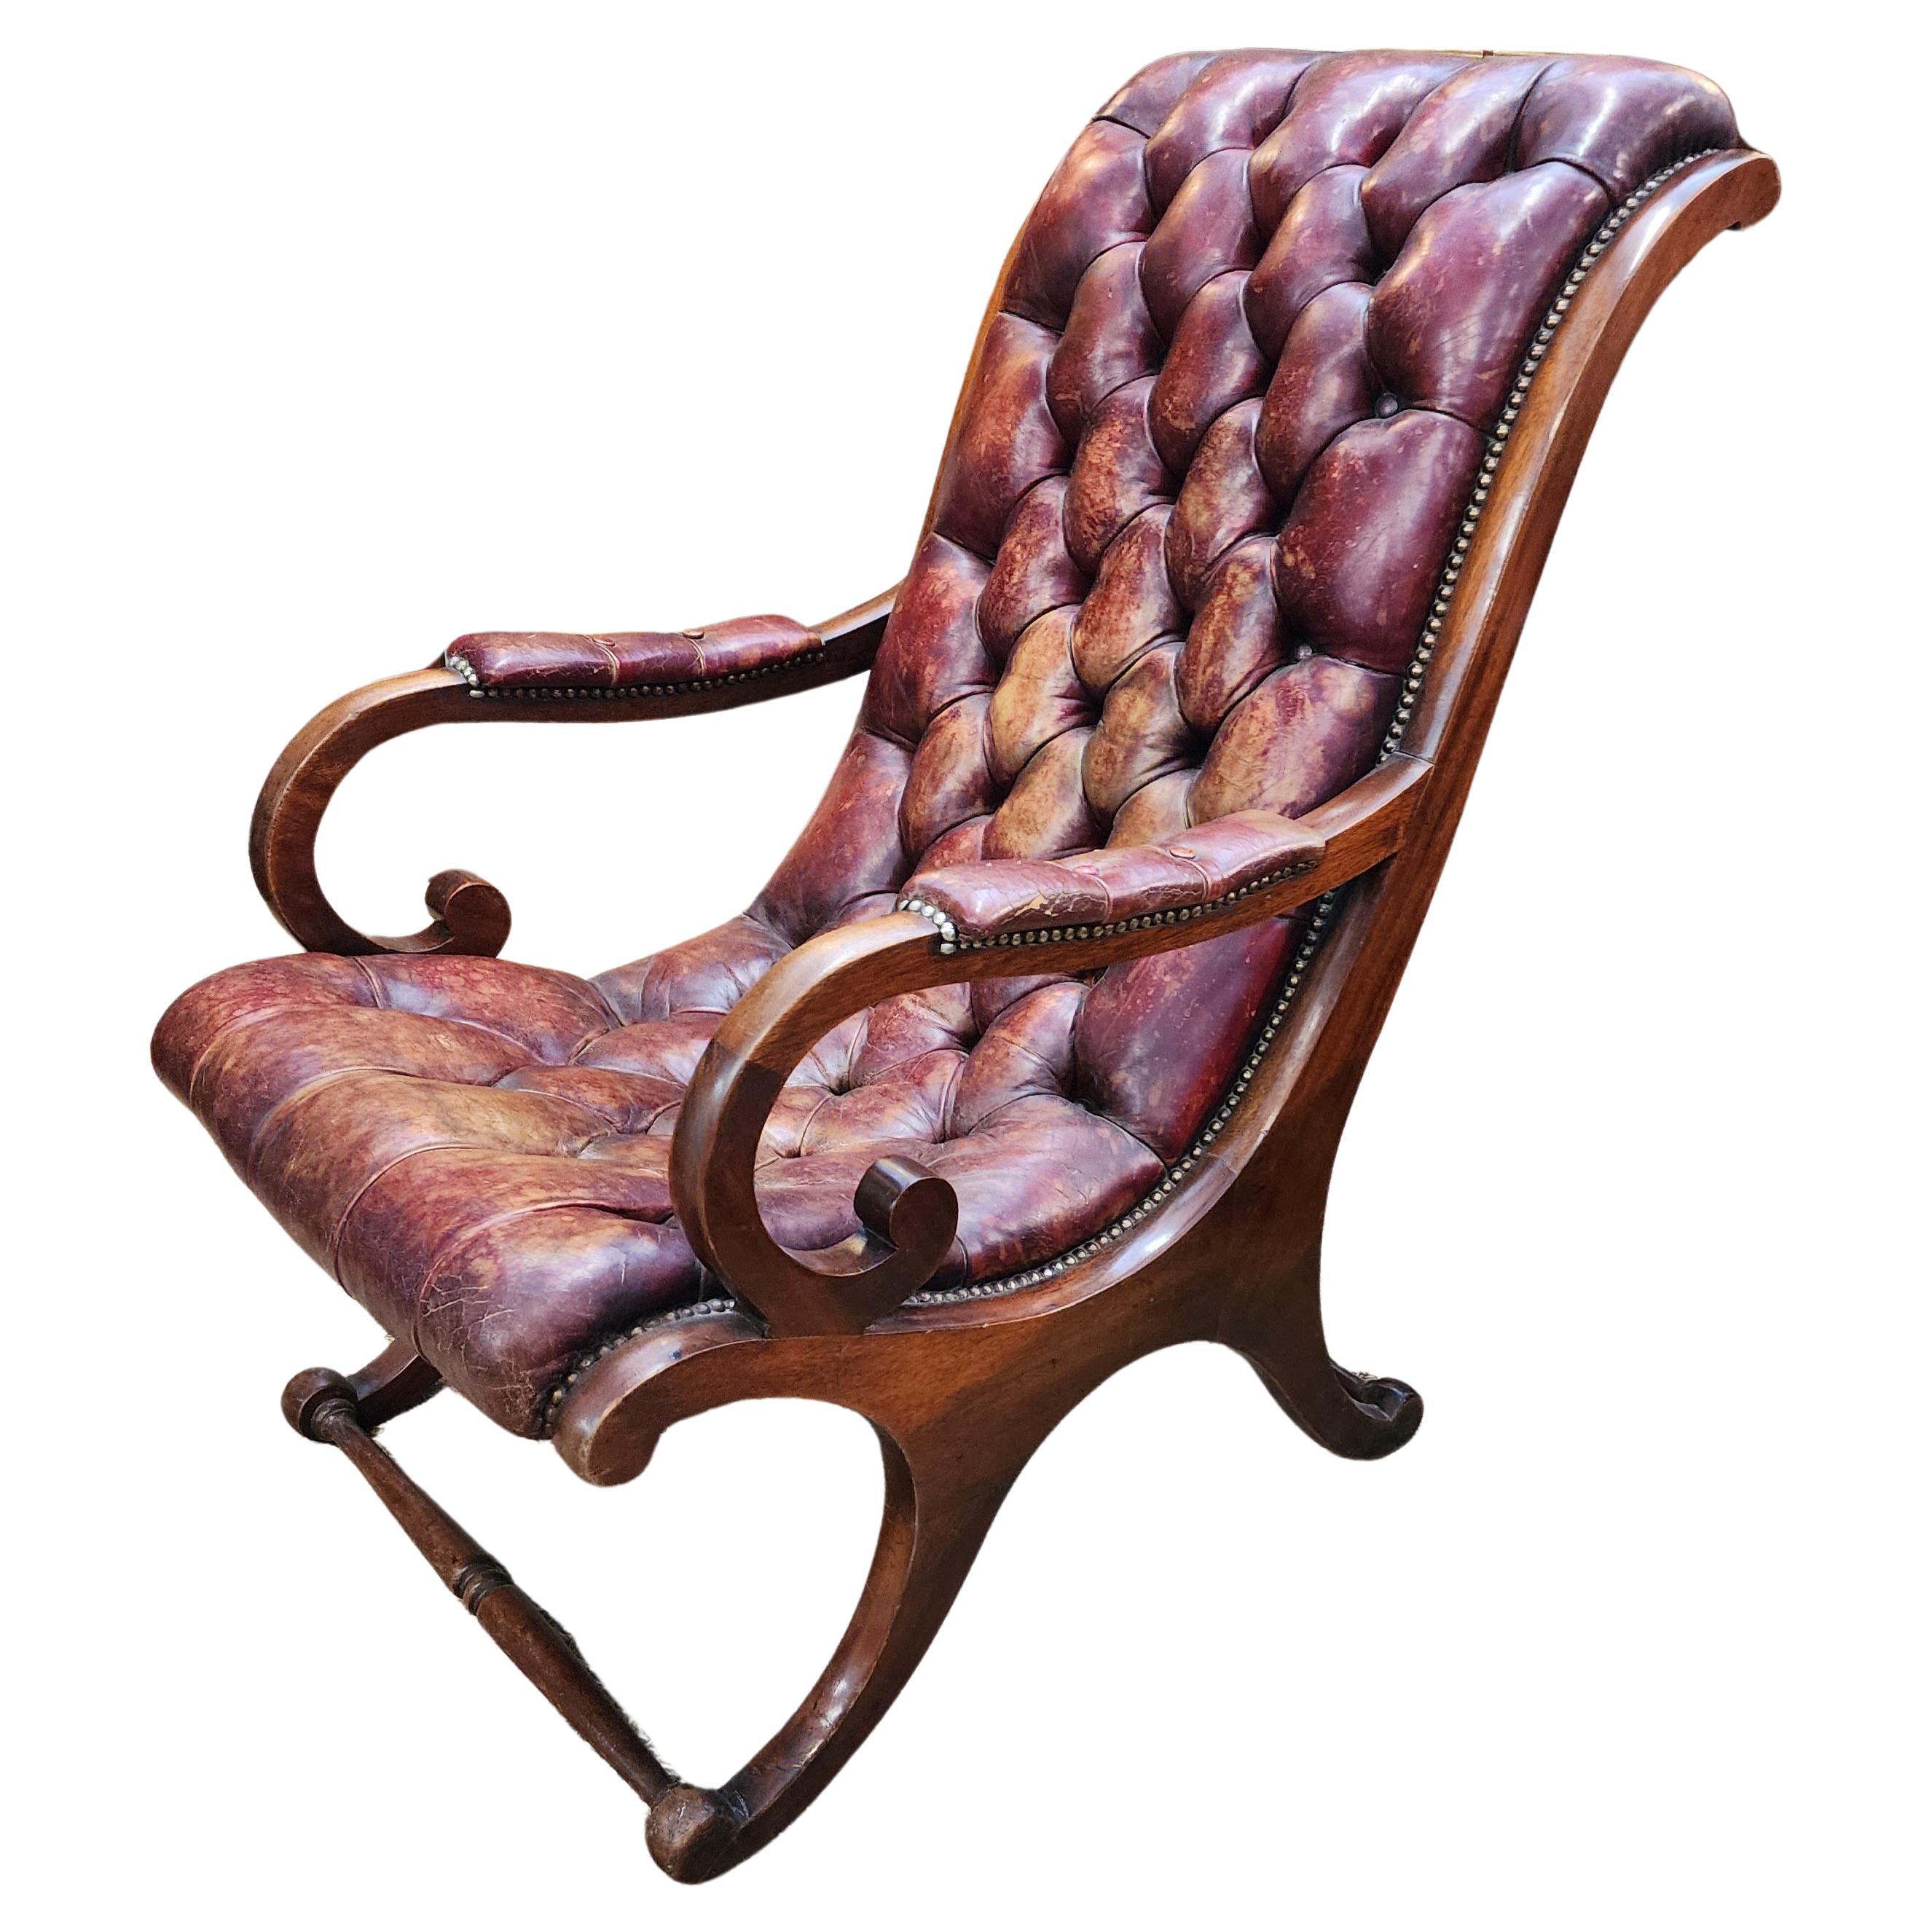 Handsome sculptural and comfortable. Those three words best tell the story of this english leather chair from the 1850's
It is beautifully constructed and has the patina warmth and age.
This can be viewed and at The Berkshire Galleries in Great